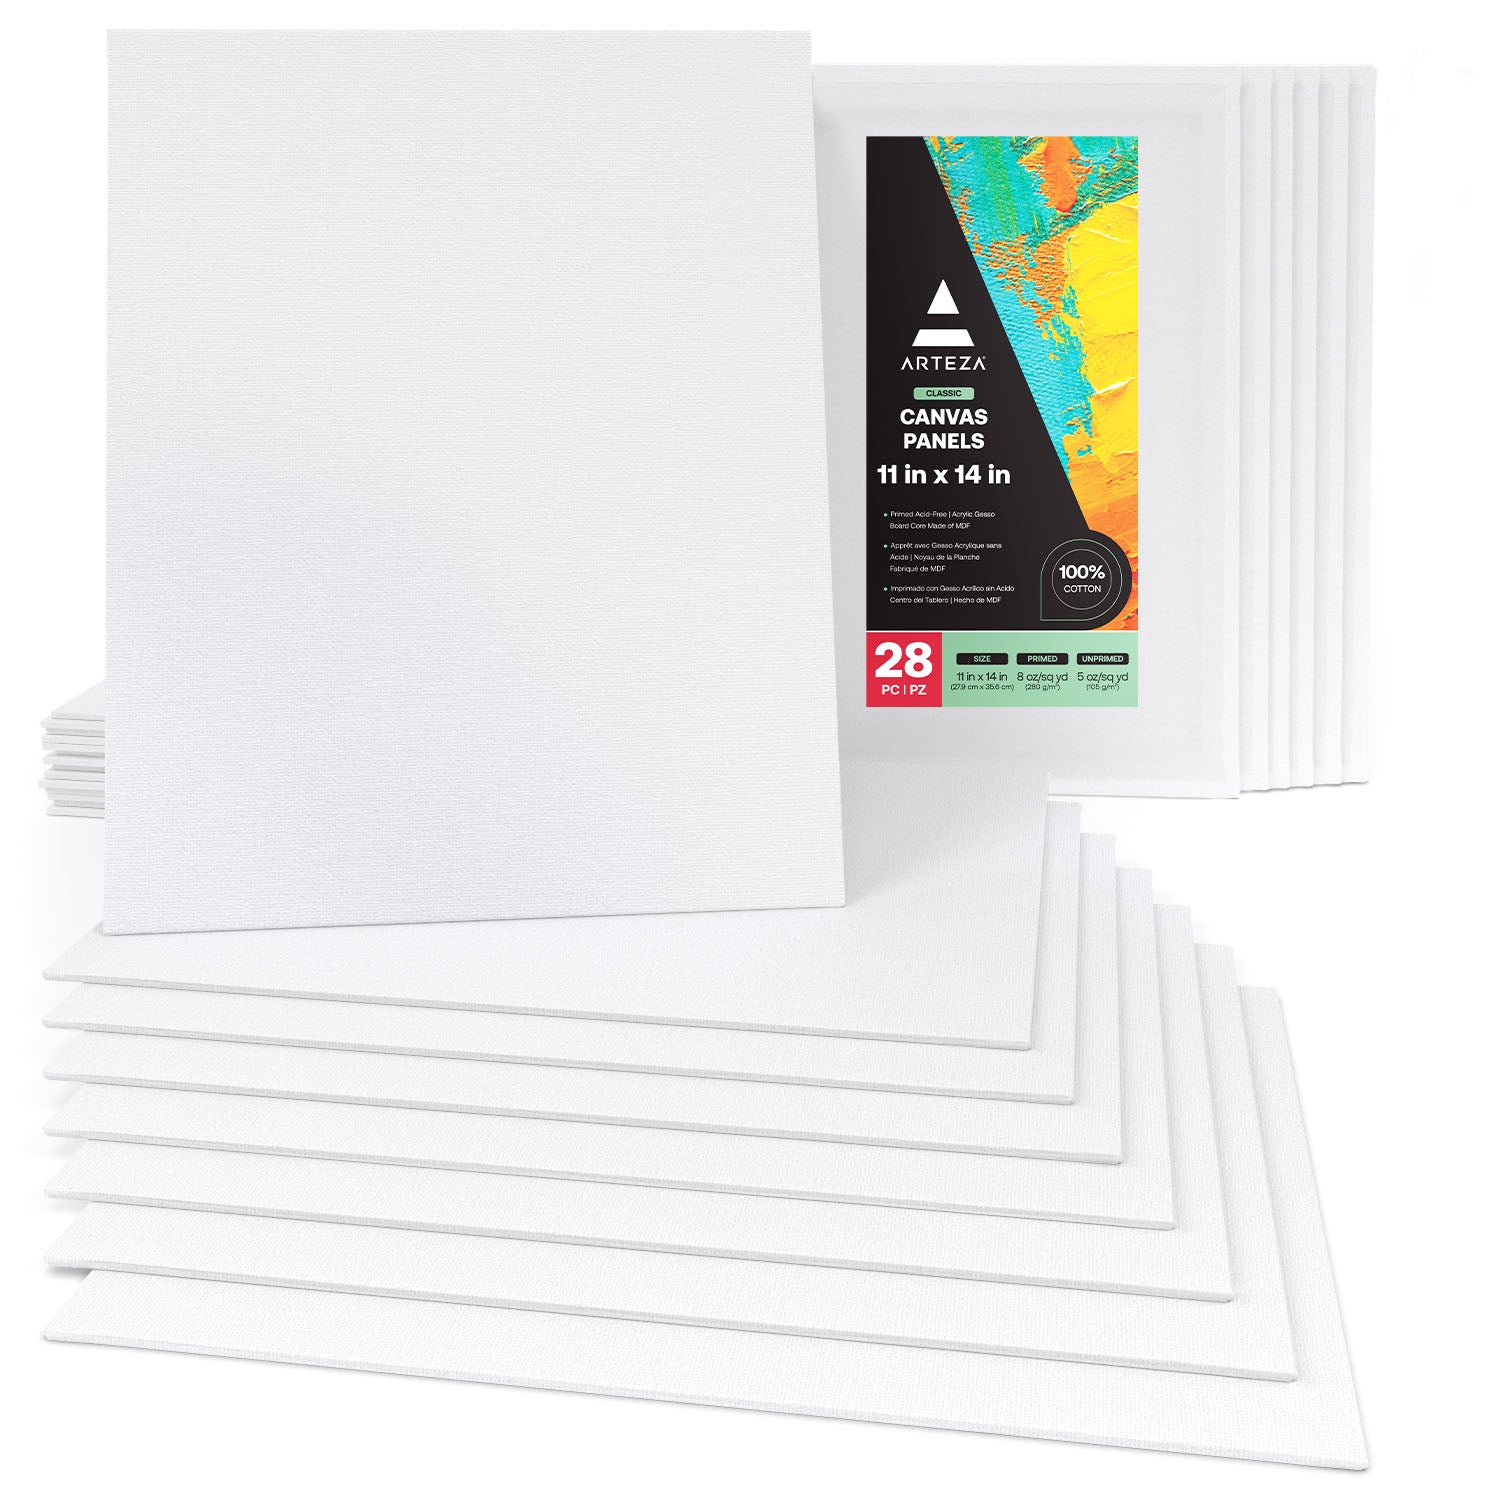 Arteza Classic Blank Triangle Stretched Canvas, 14, Blank Canvas Boards  for Painting - 8 Pack